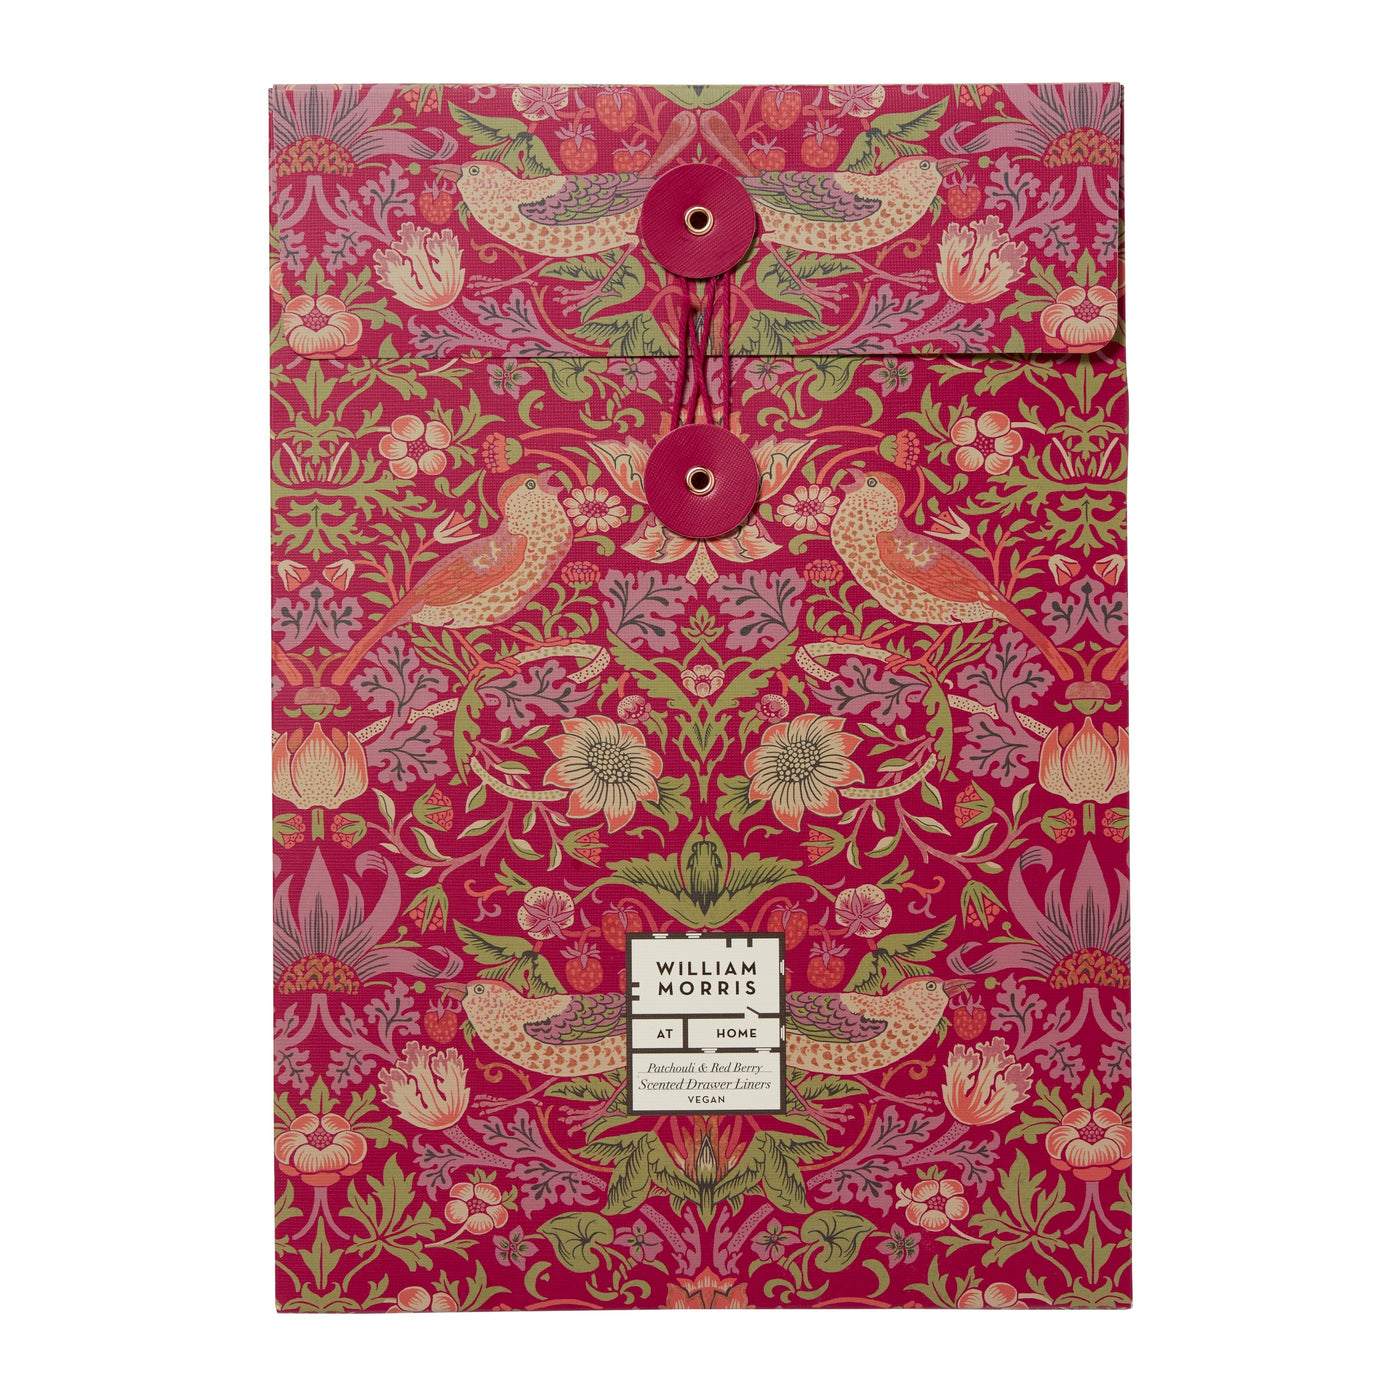 Strawberry Thief Patchouli & Red Berry Scented Drawer Liners - Heathcote & Ivory